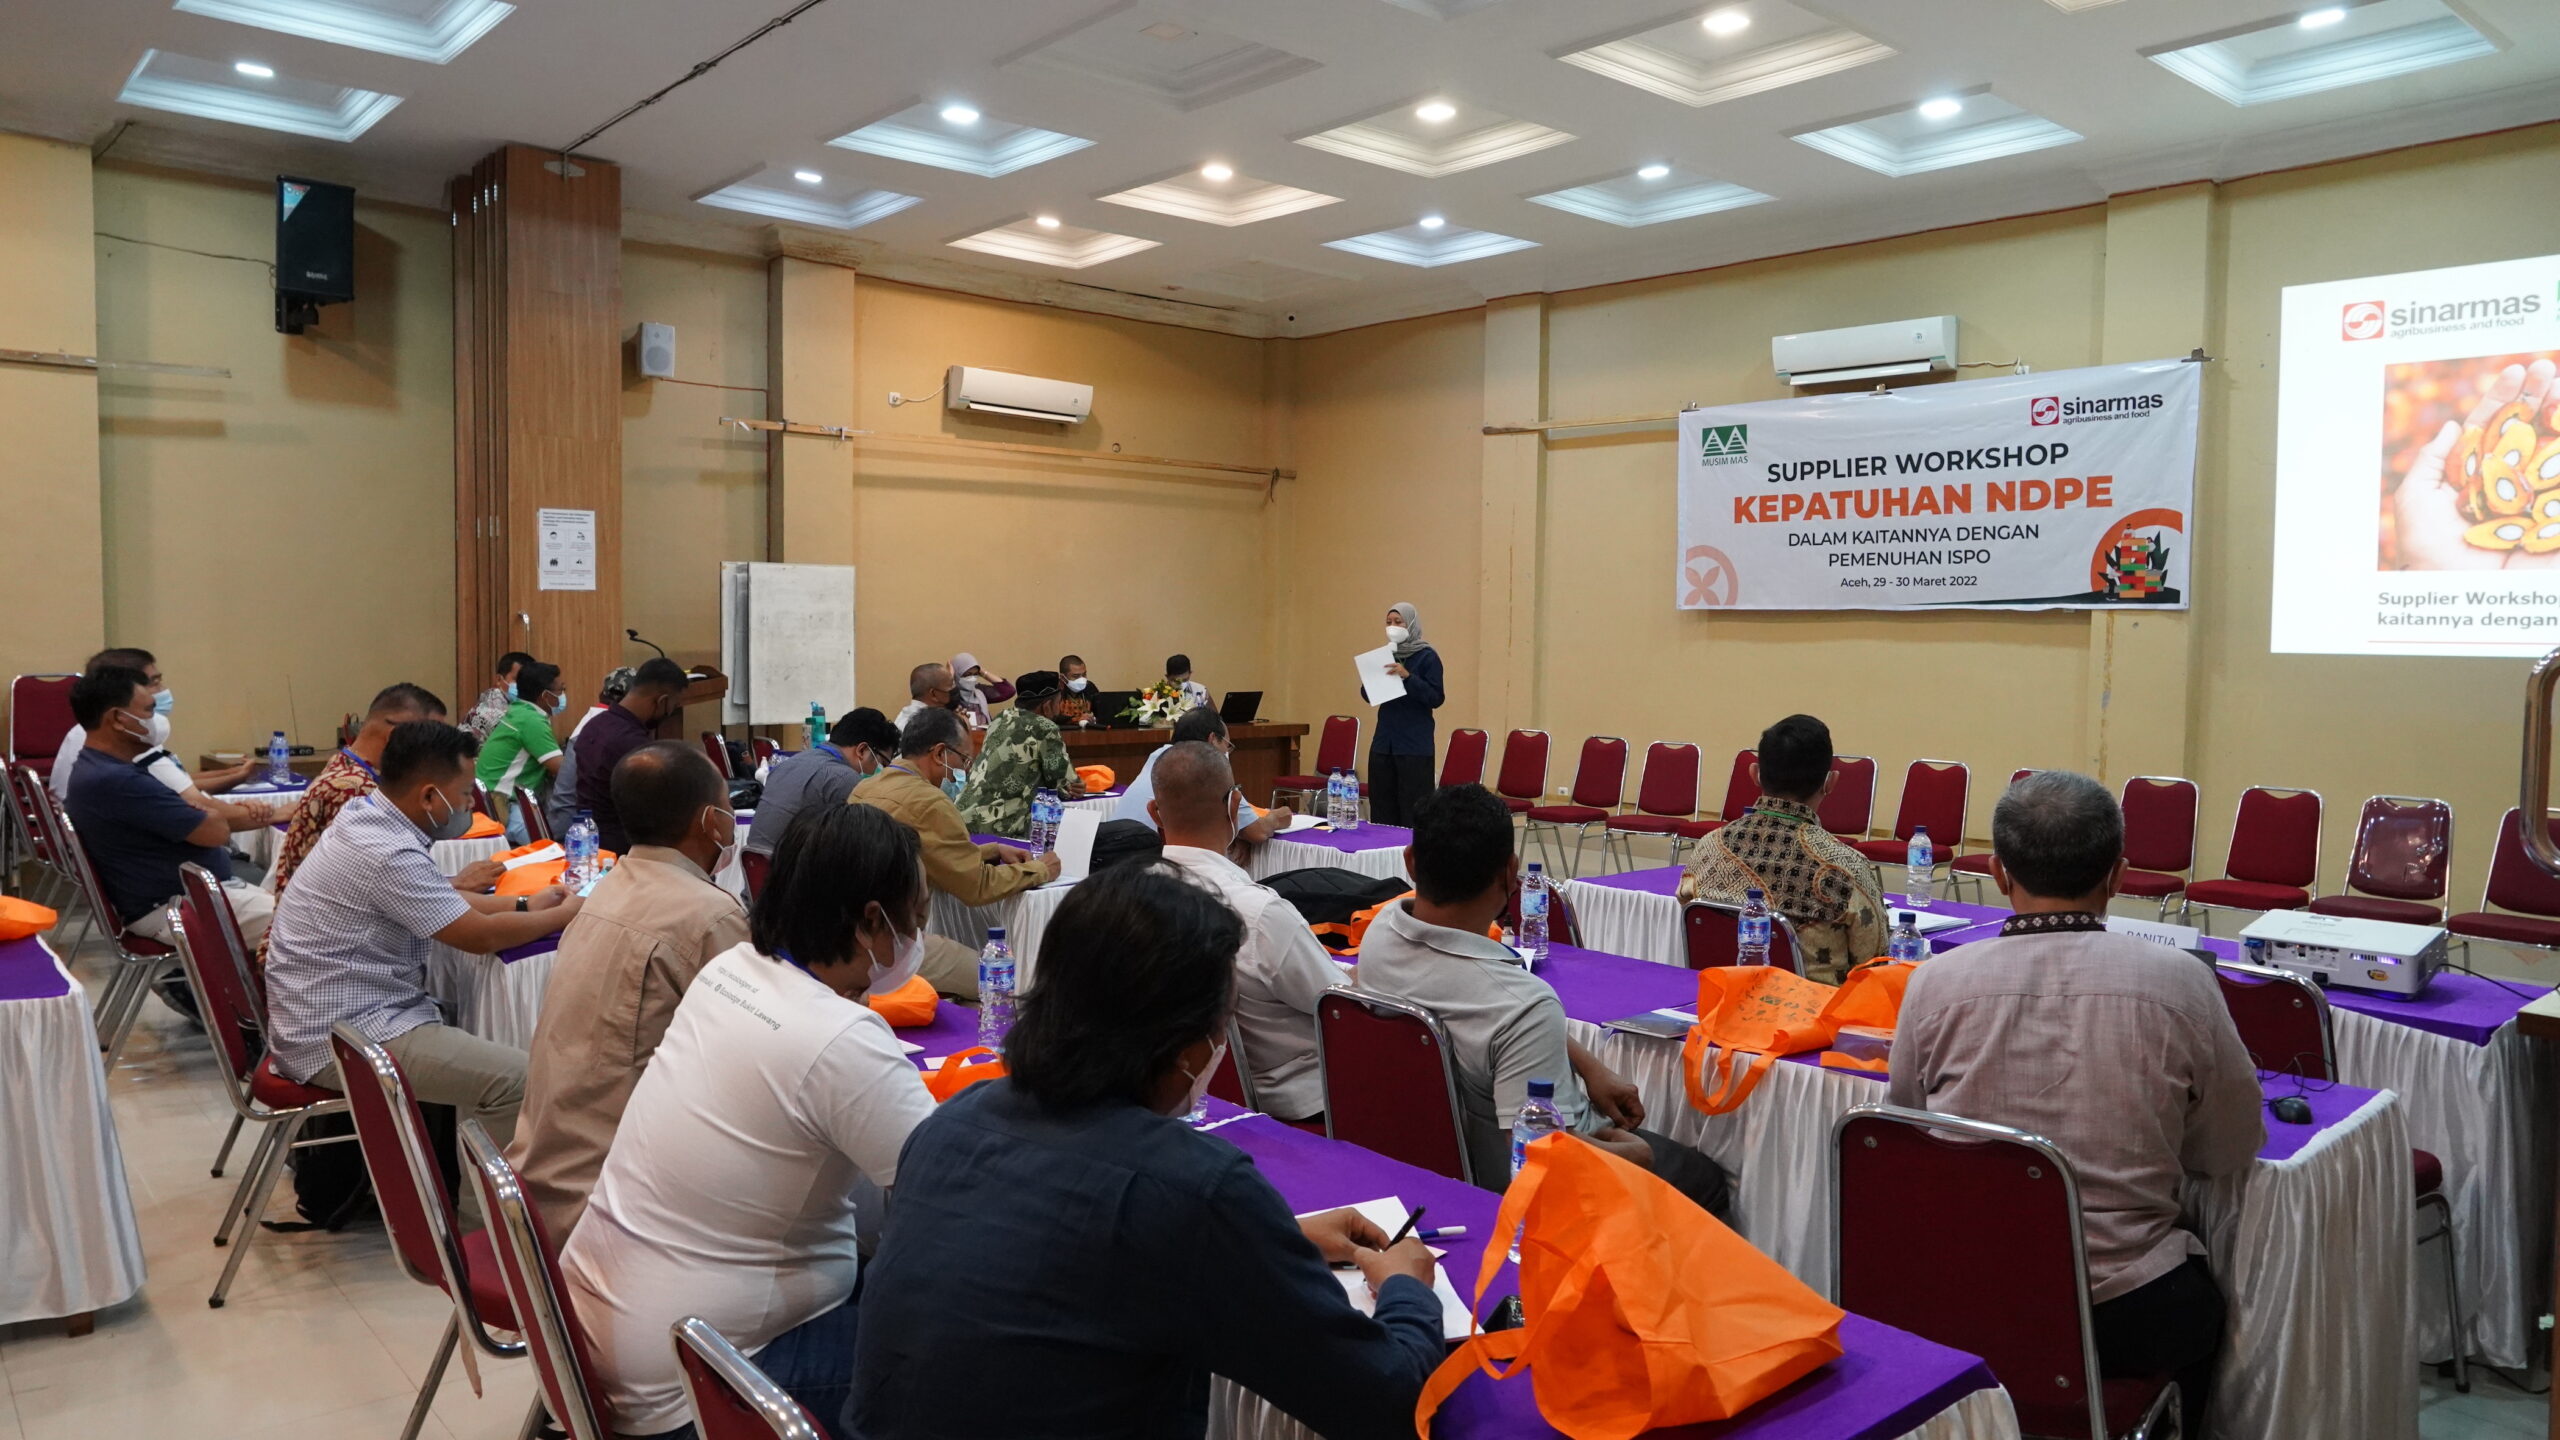 Musim Mas and Sinar Mas Agribusiness and Food Jointly Hosted Second Supplier Workshop in Aceh